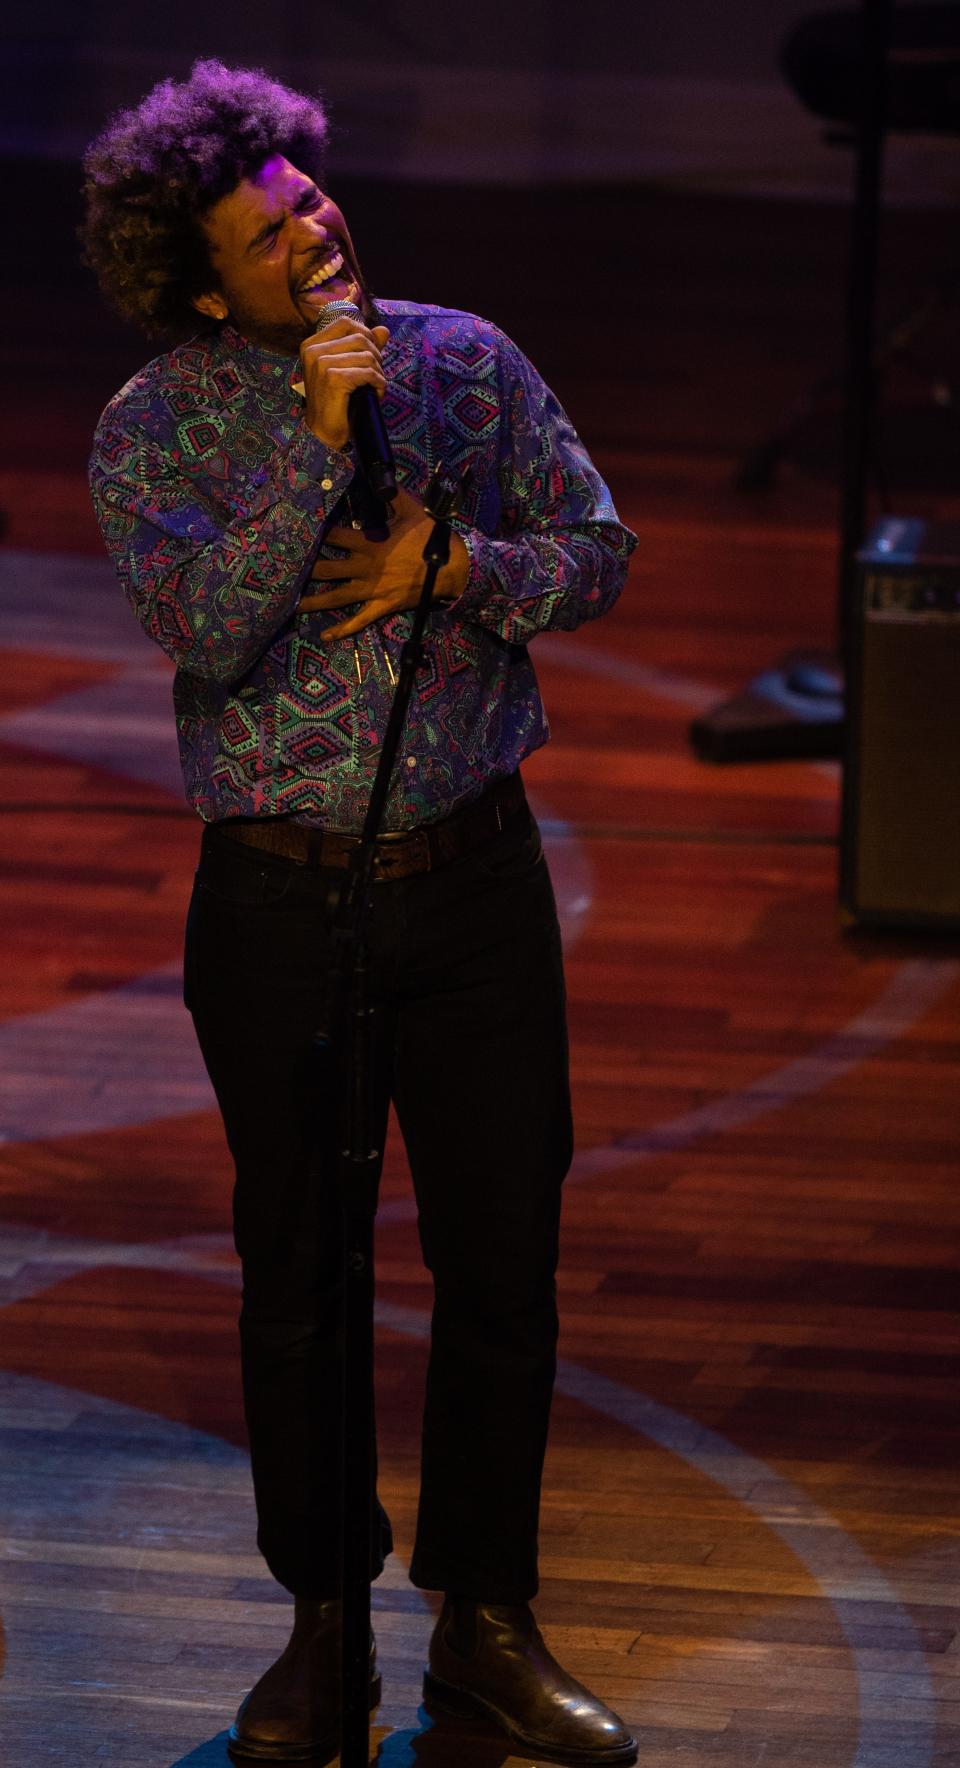 Devon Gilfillian performs during the You Got Gold event to honor the legacy of singer/songwriter John Prine at Ryman Auditorium in Nashville, Tenn., Tuesday, Oct. 10, 2023.